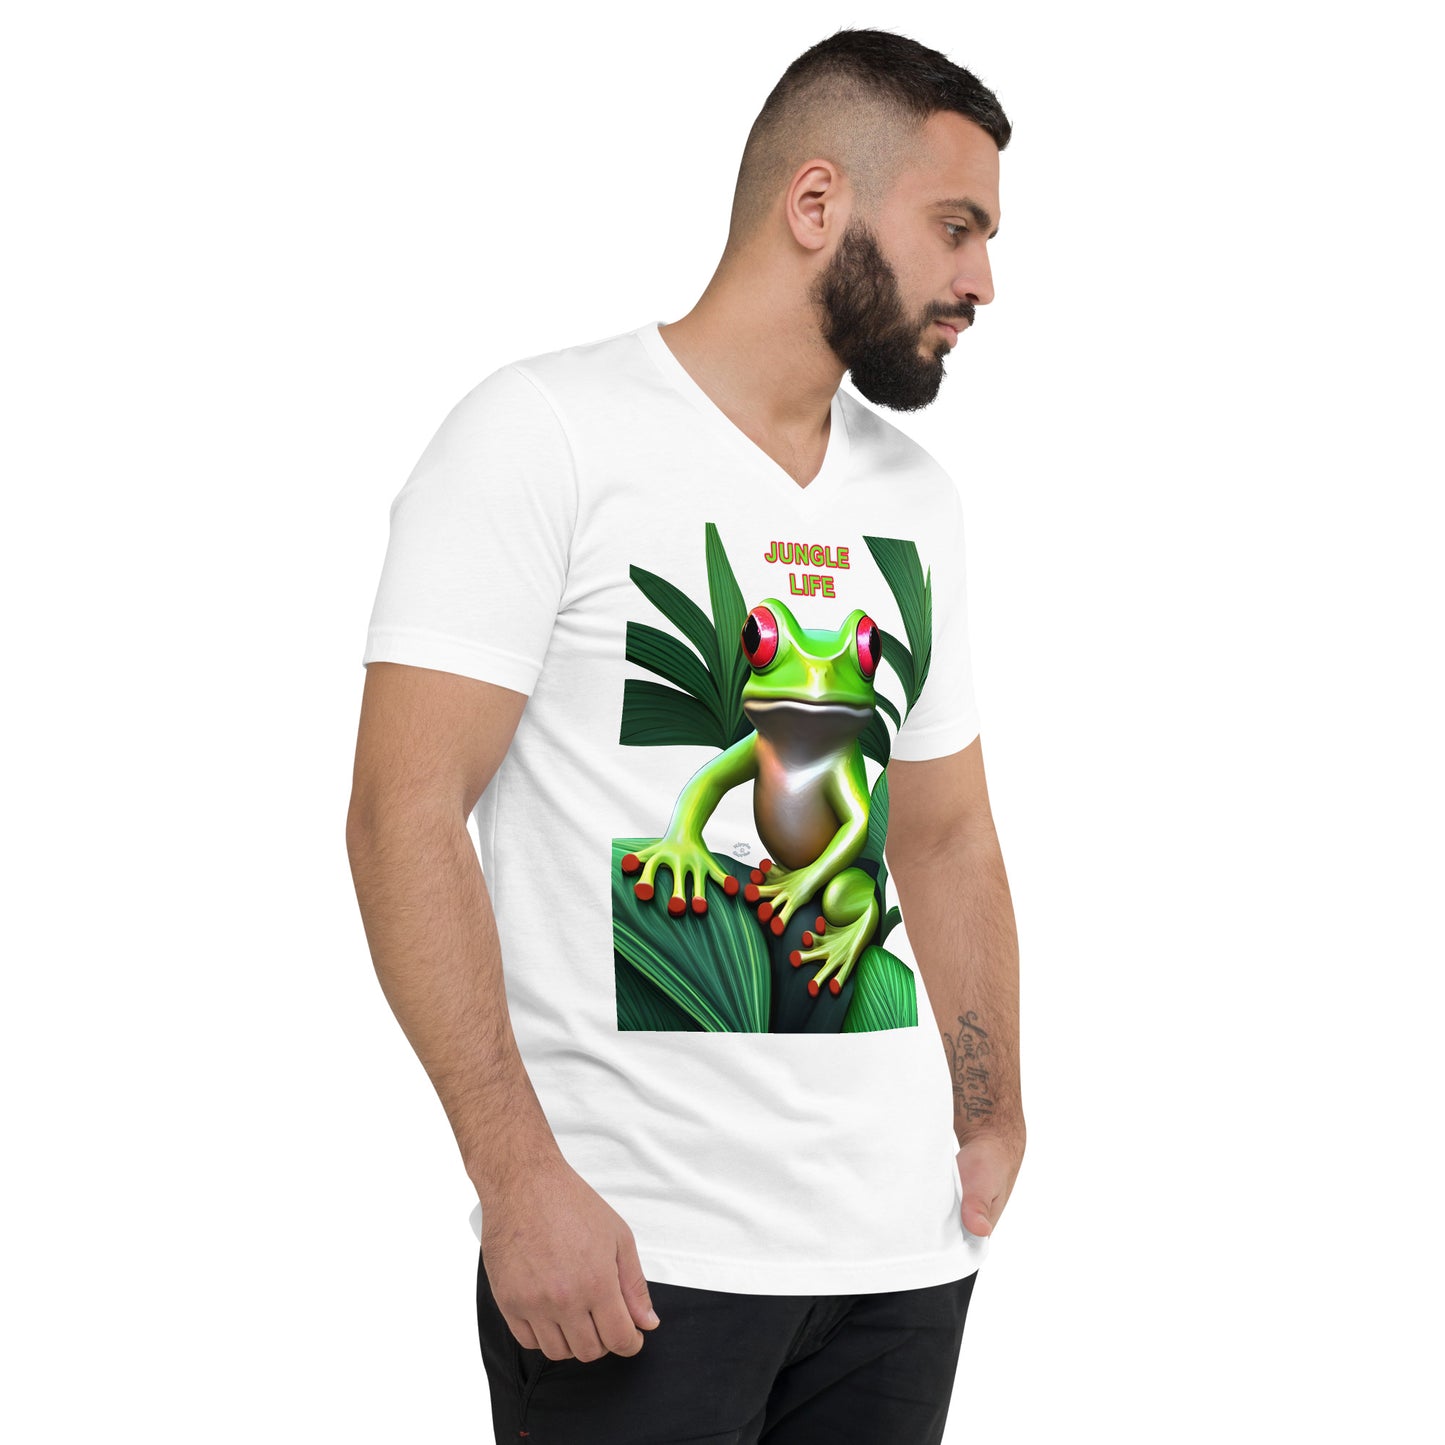 A picture of a man wearing a tshirt with a green frog poking through some leaves and the text JUNGLE LIFE - white right front